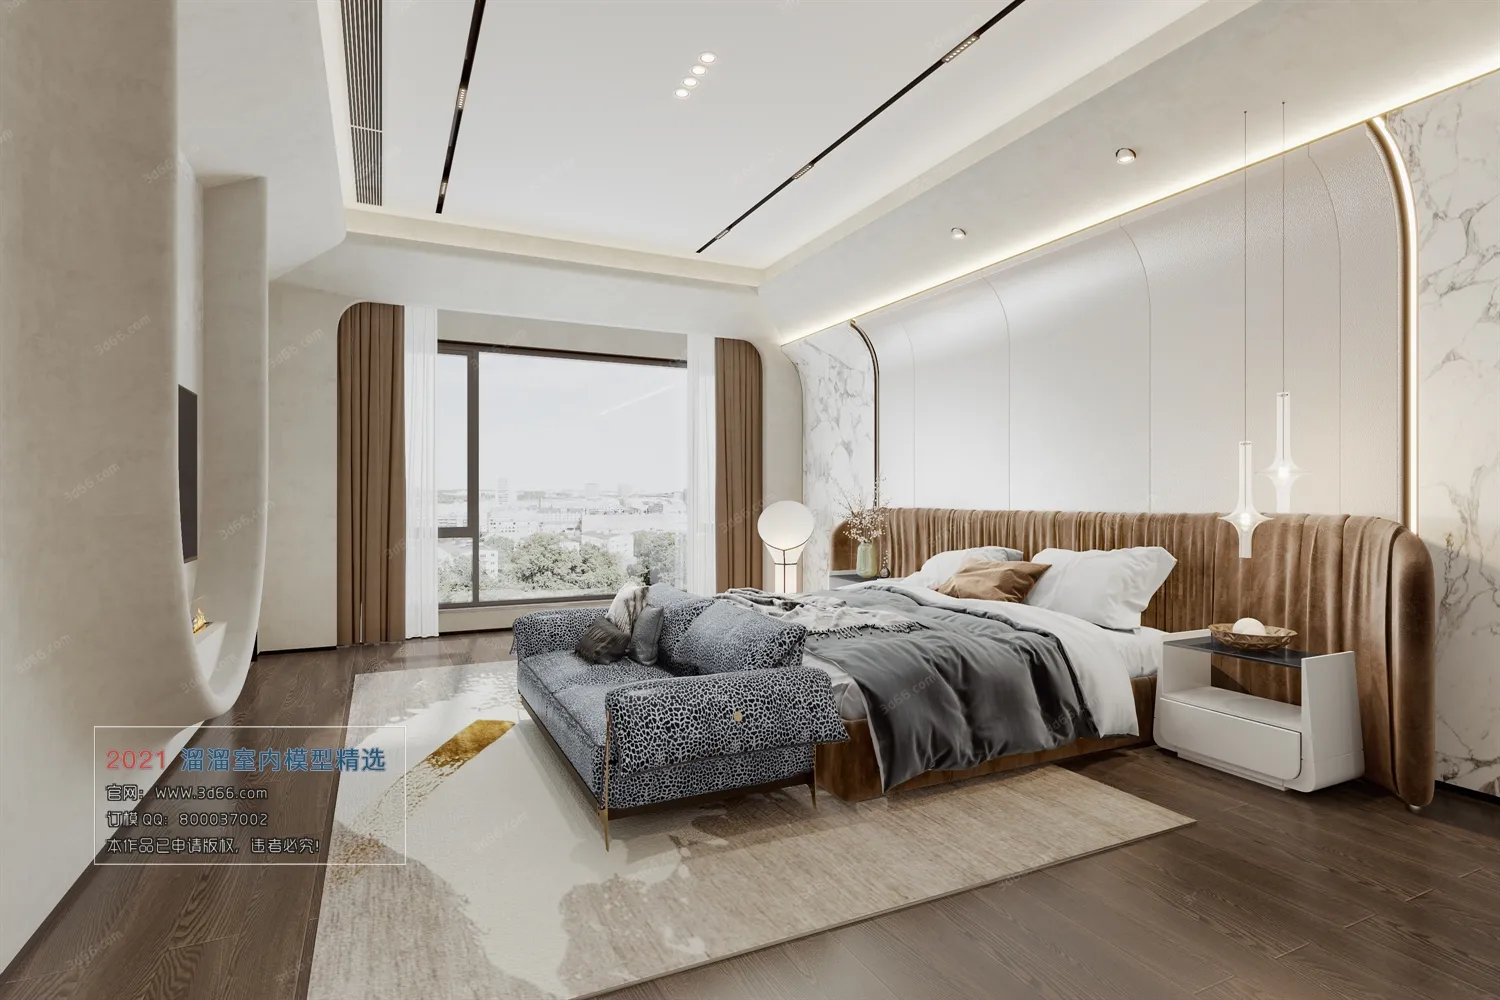 BEDROOM – A007-Modern style-Vray model